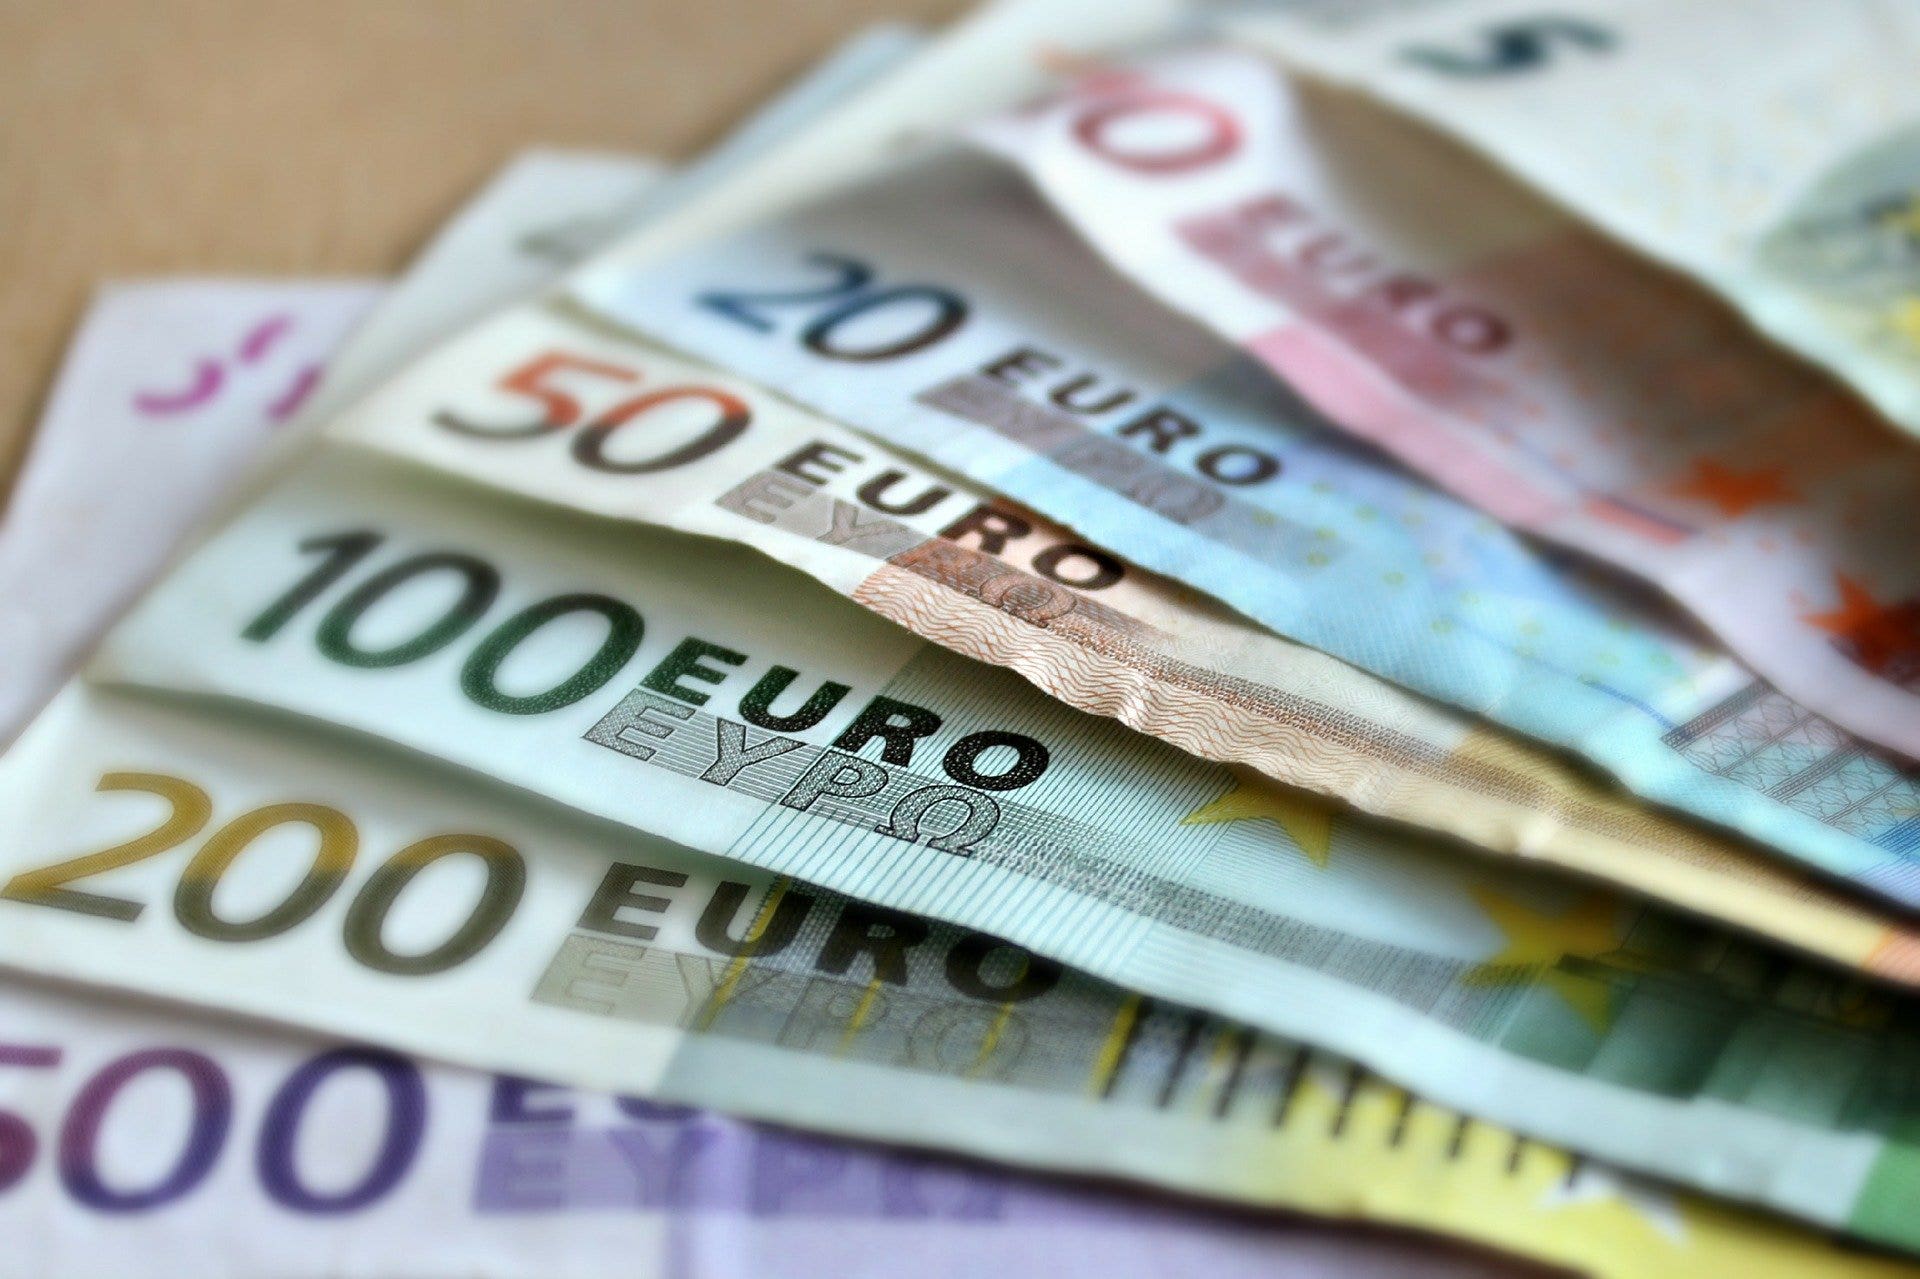 EUR/USD Forecast: Technically Neutral, But The Risk Of A Bearish Extension Increased